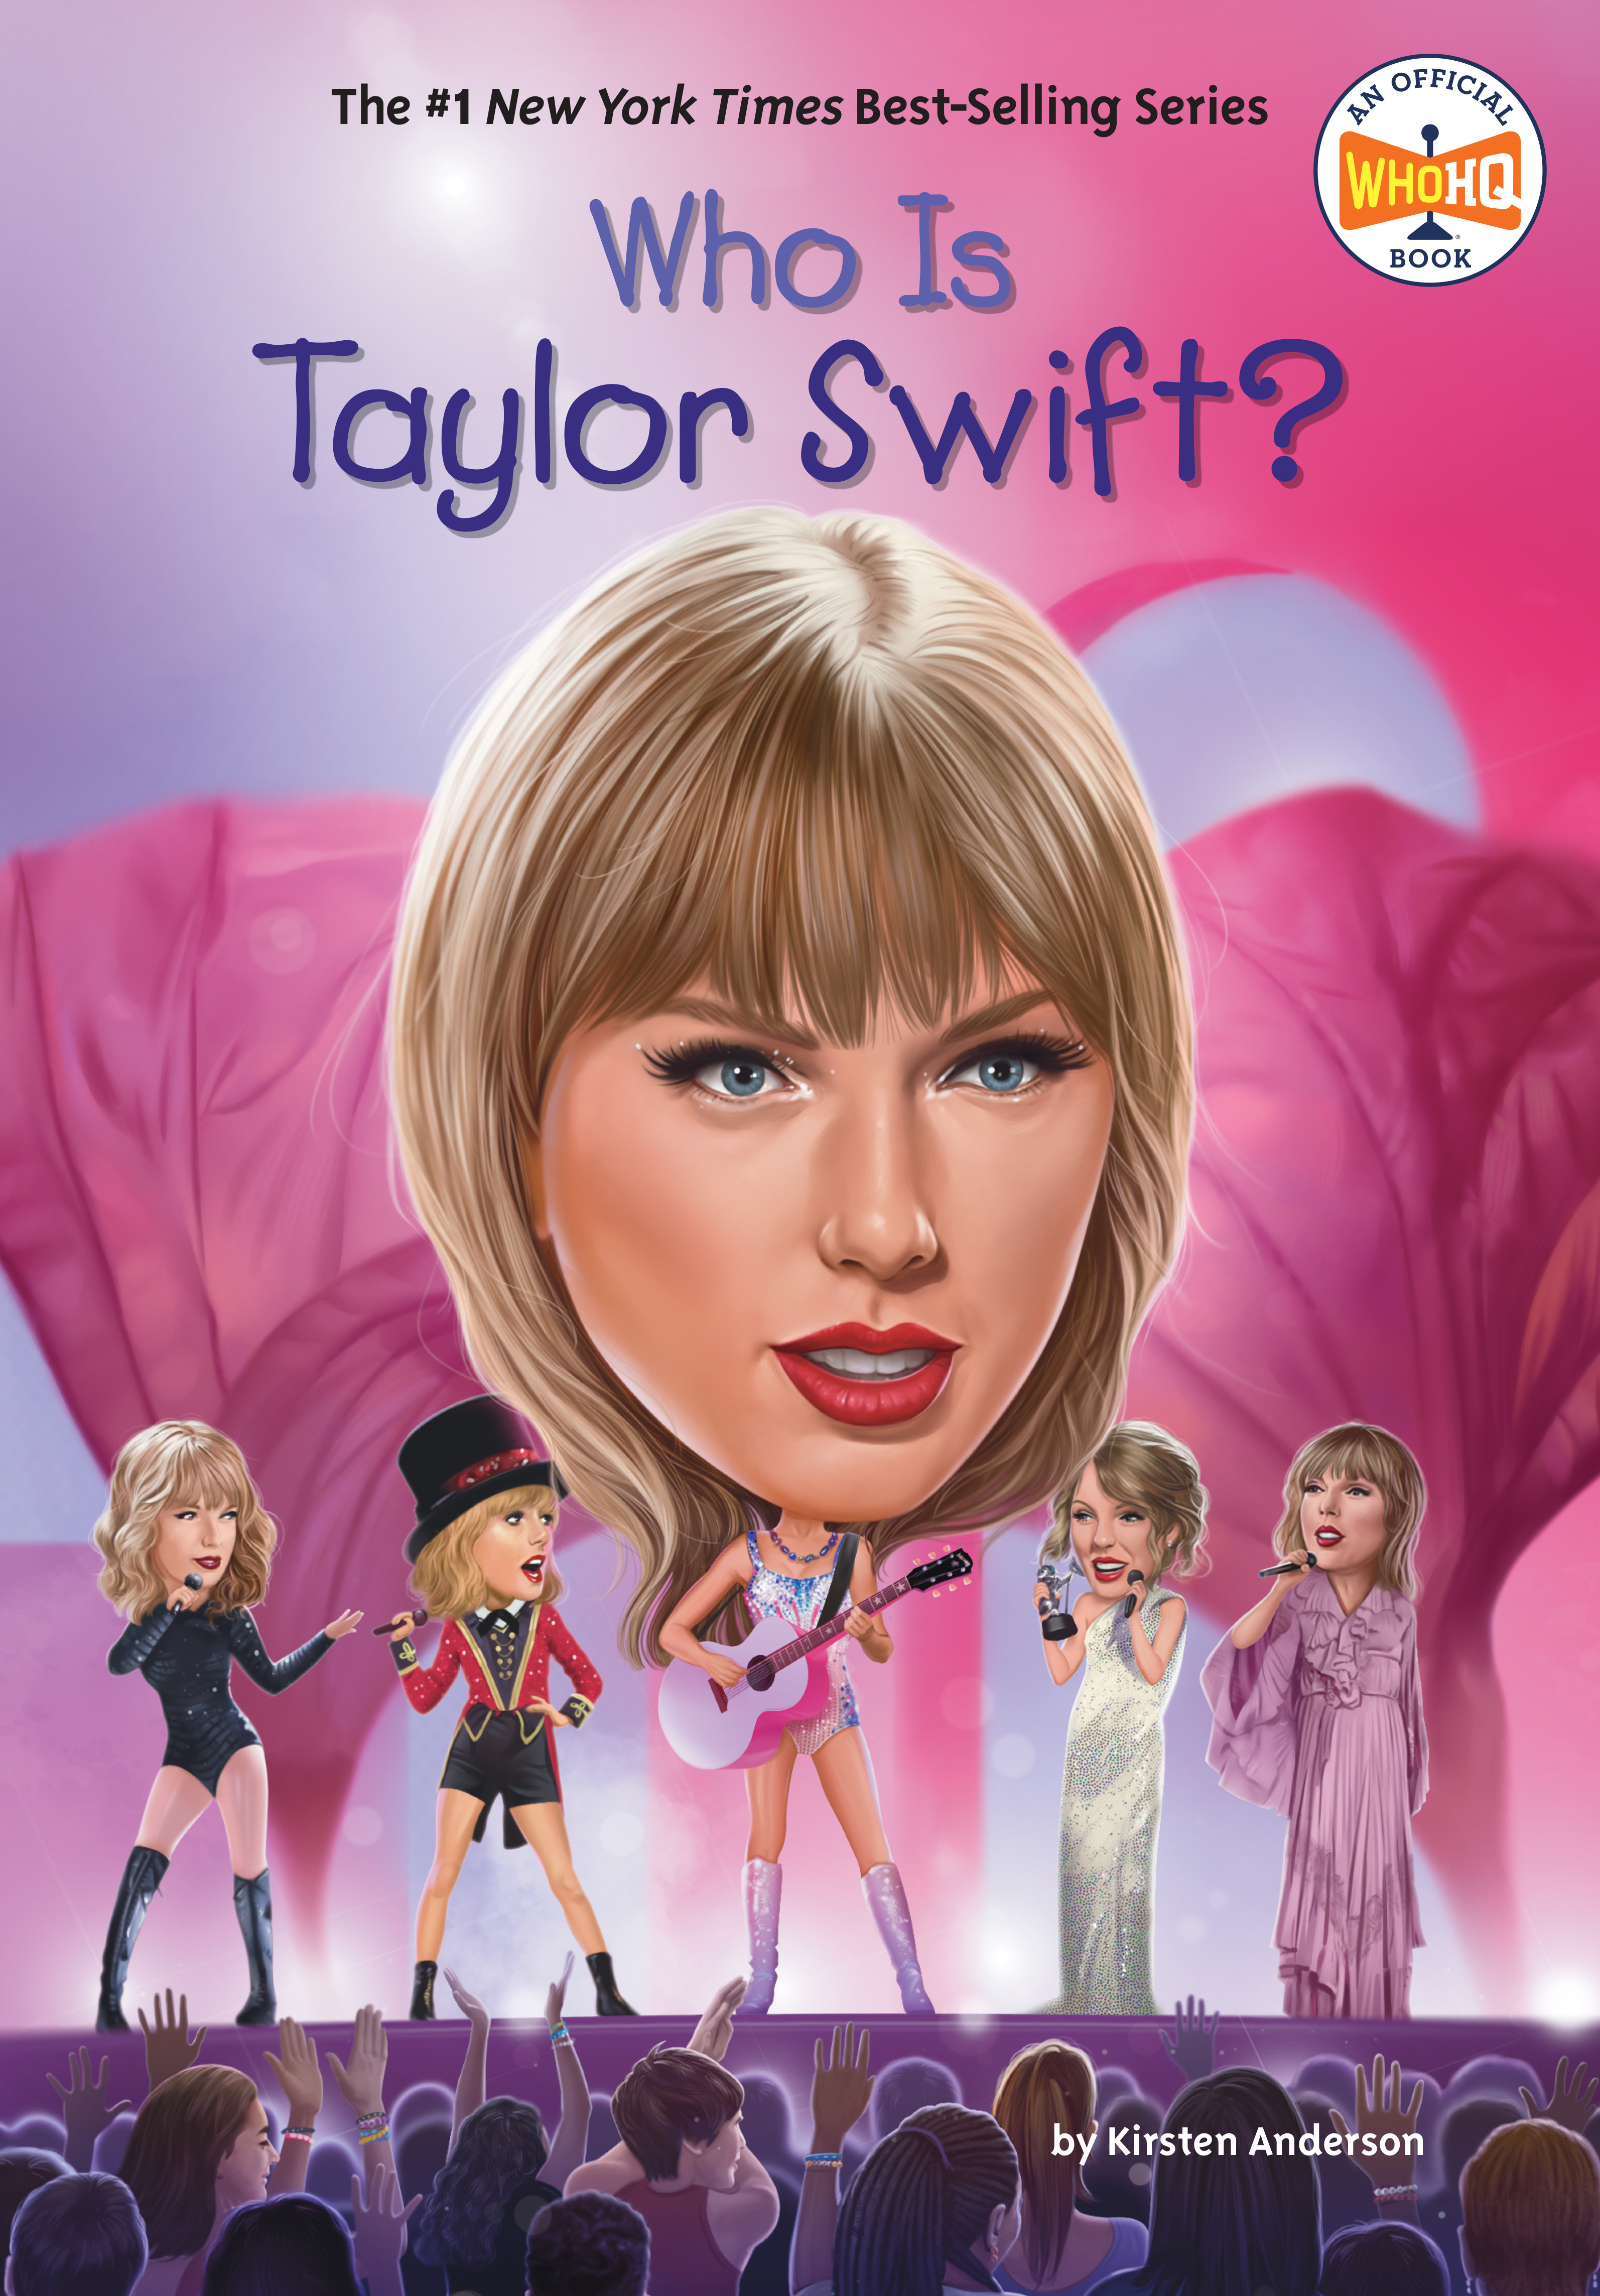 Who Is Taylor Swift? | Anderson, Kirsten (Auteur) | Copeland, Gregory (Illustrateur)